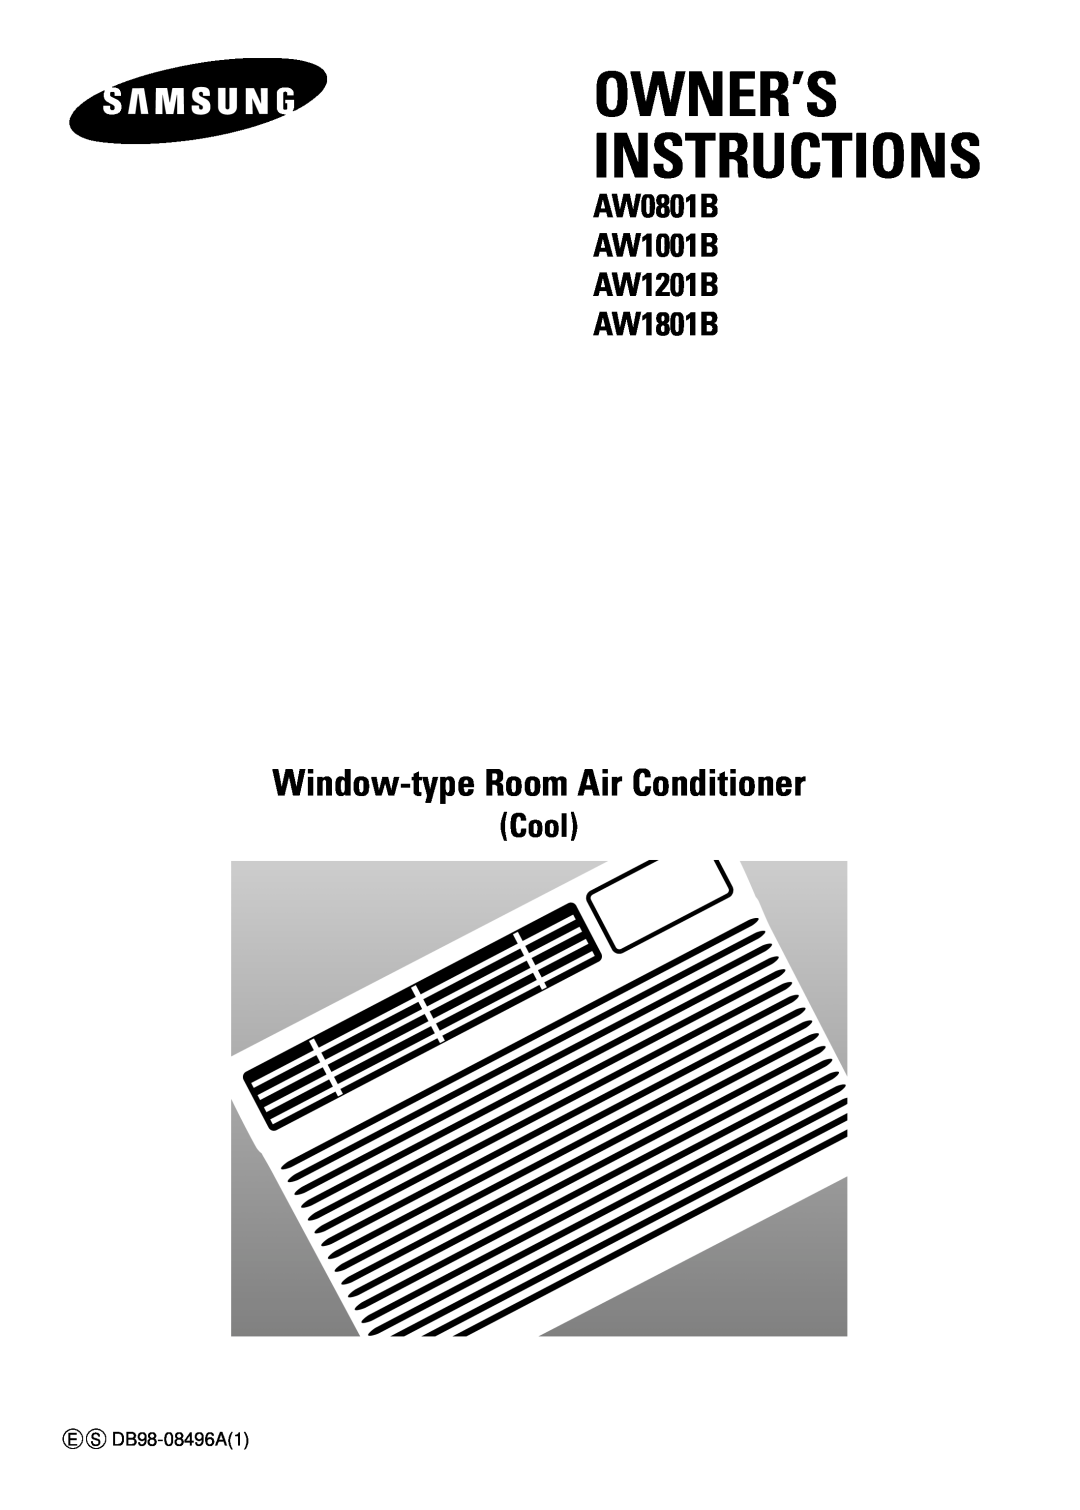 Samsung manual Owner’S Instructions, Window-typeRoom Air Conditioner, AW0801B AW1001B AW1201B AW1801B, Cool 